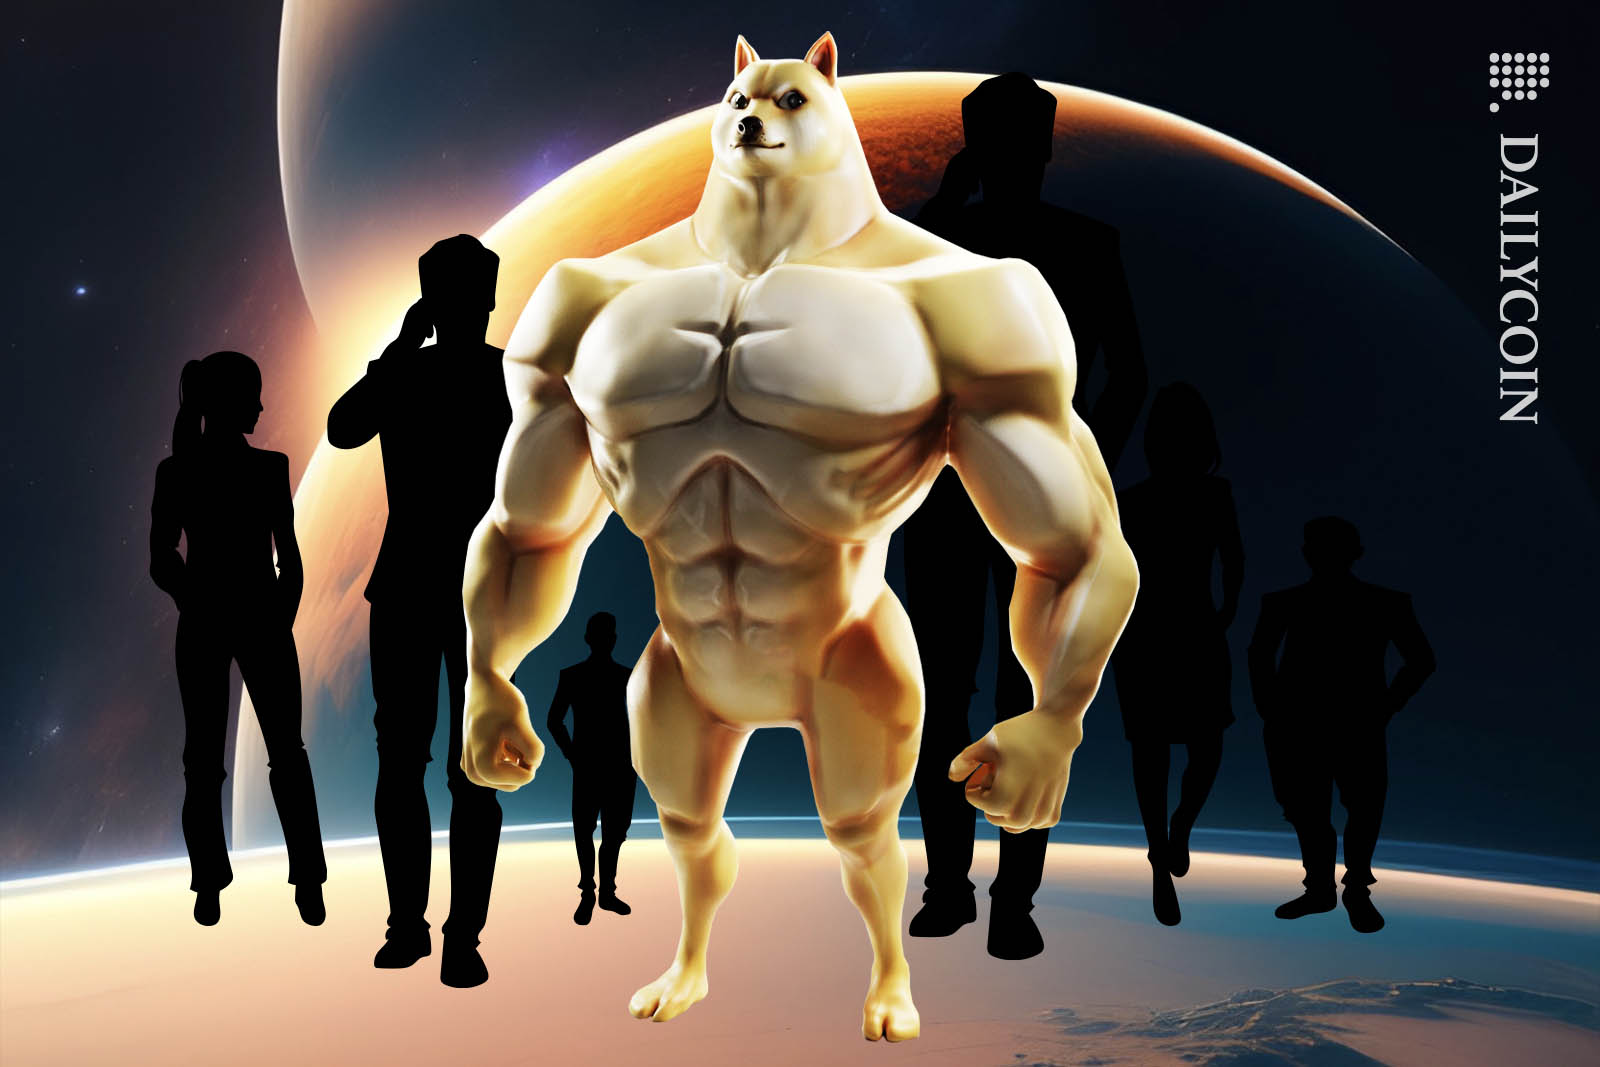 Huge buffed Doge posing in space surrounded by 6 mysterious figures.